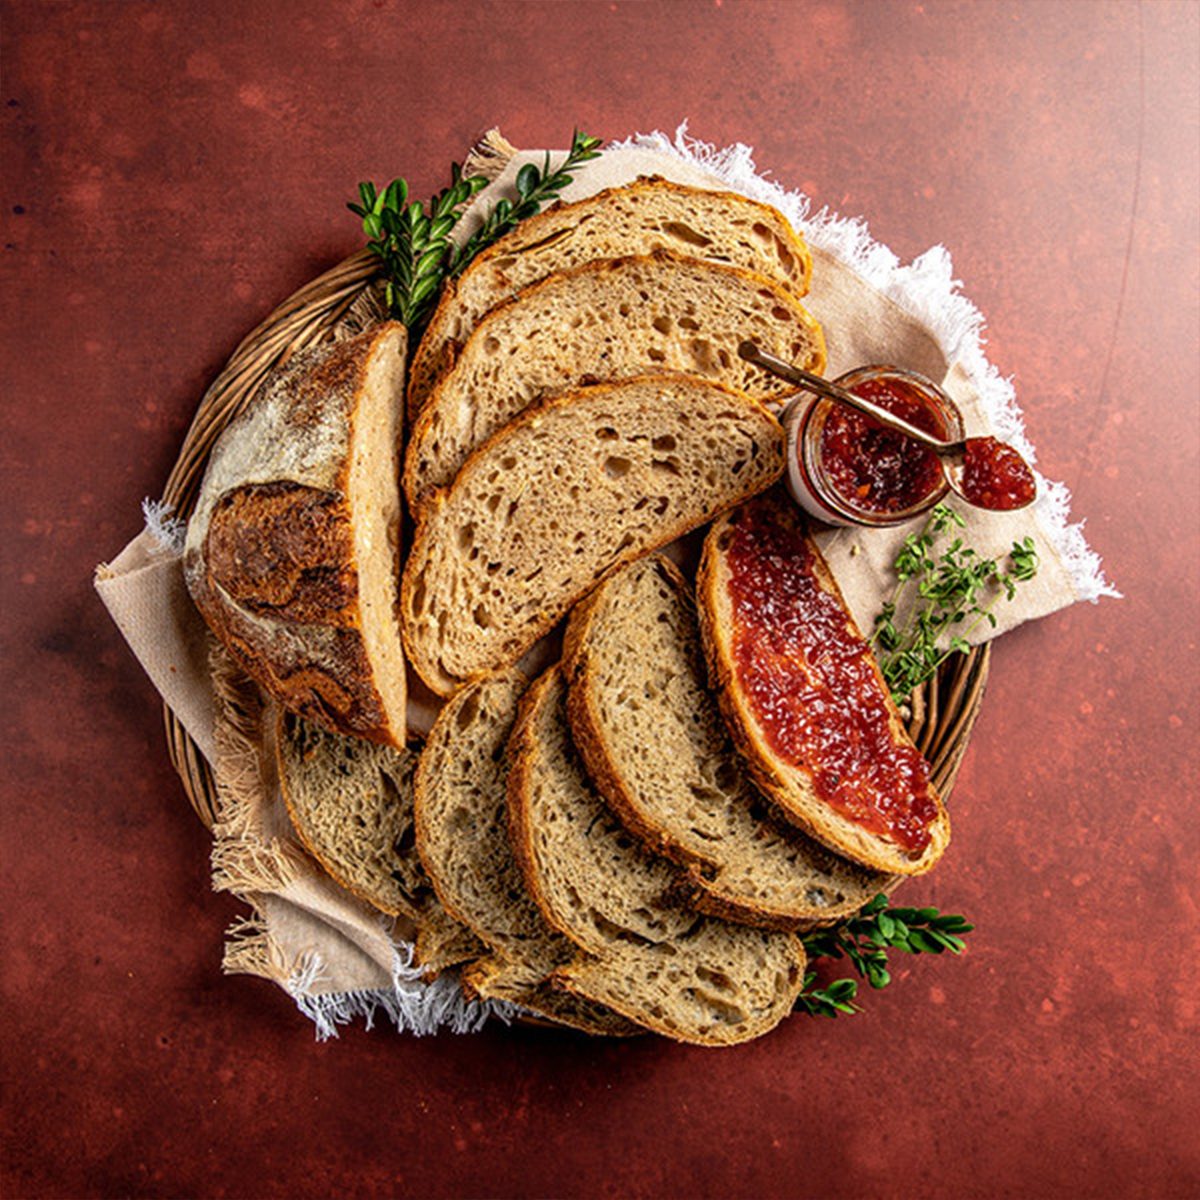 Breads And Spreads Subscription